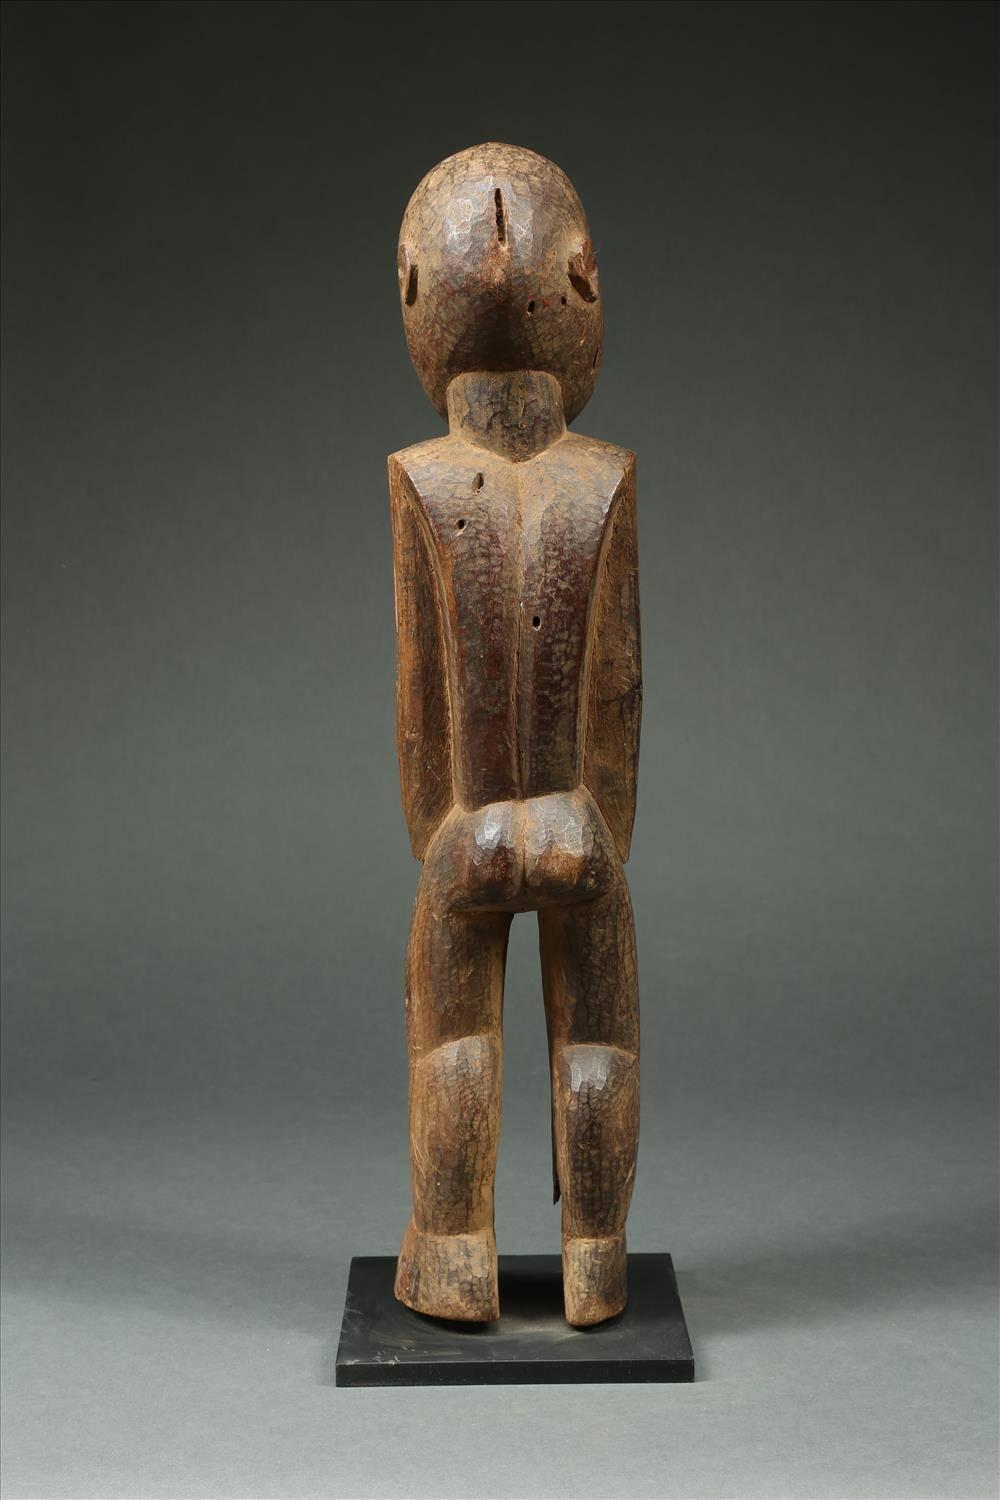 Finely carved large geometric figure from the Lobi, of Ghana and Burkina Faso, dating from the early to mid-20th century. It has a large head with projecting eyes, nose and mouth creating a captivating gaze. Carved from very hard wood with fine